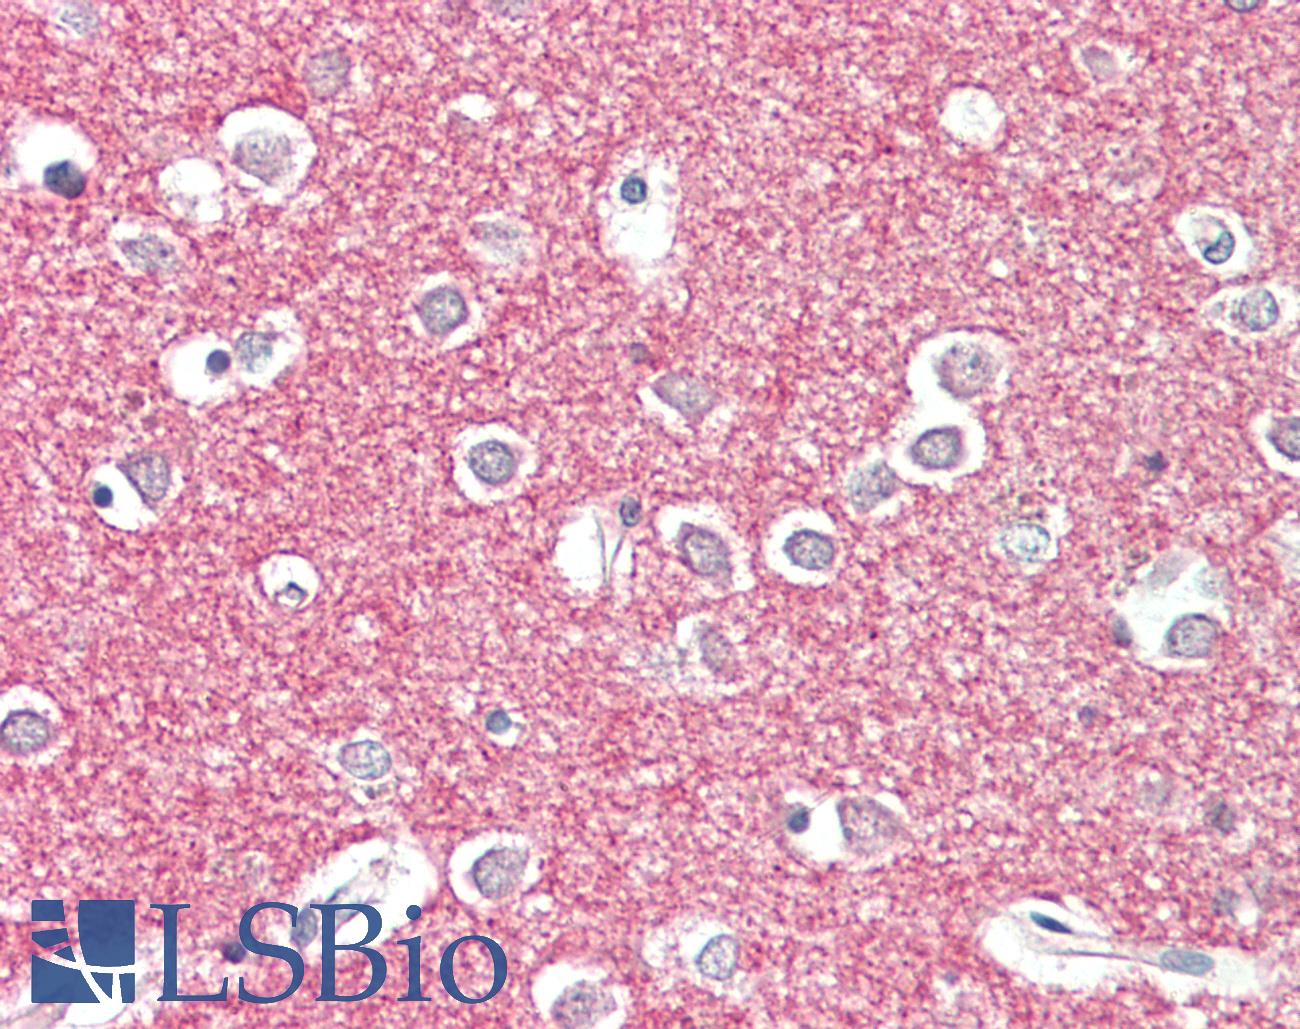 STX1A / STX1B Antibody - Anti-STX1A/STX1B2 antibody IHC staining of human brain, cortex. Immunohistochemistry of formalin-fixed, paraffin-embedded tissue after heat-induced antigen retrieval. Antibody concentration 5 ug/ml.